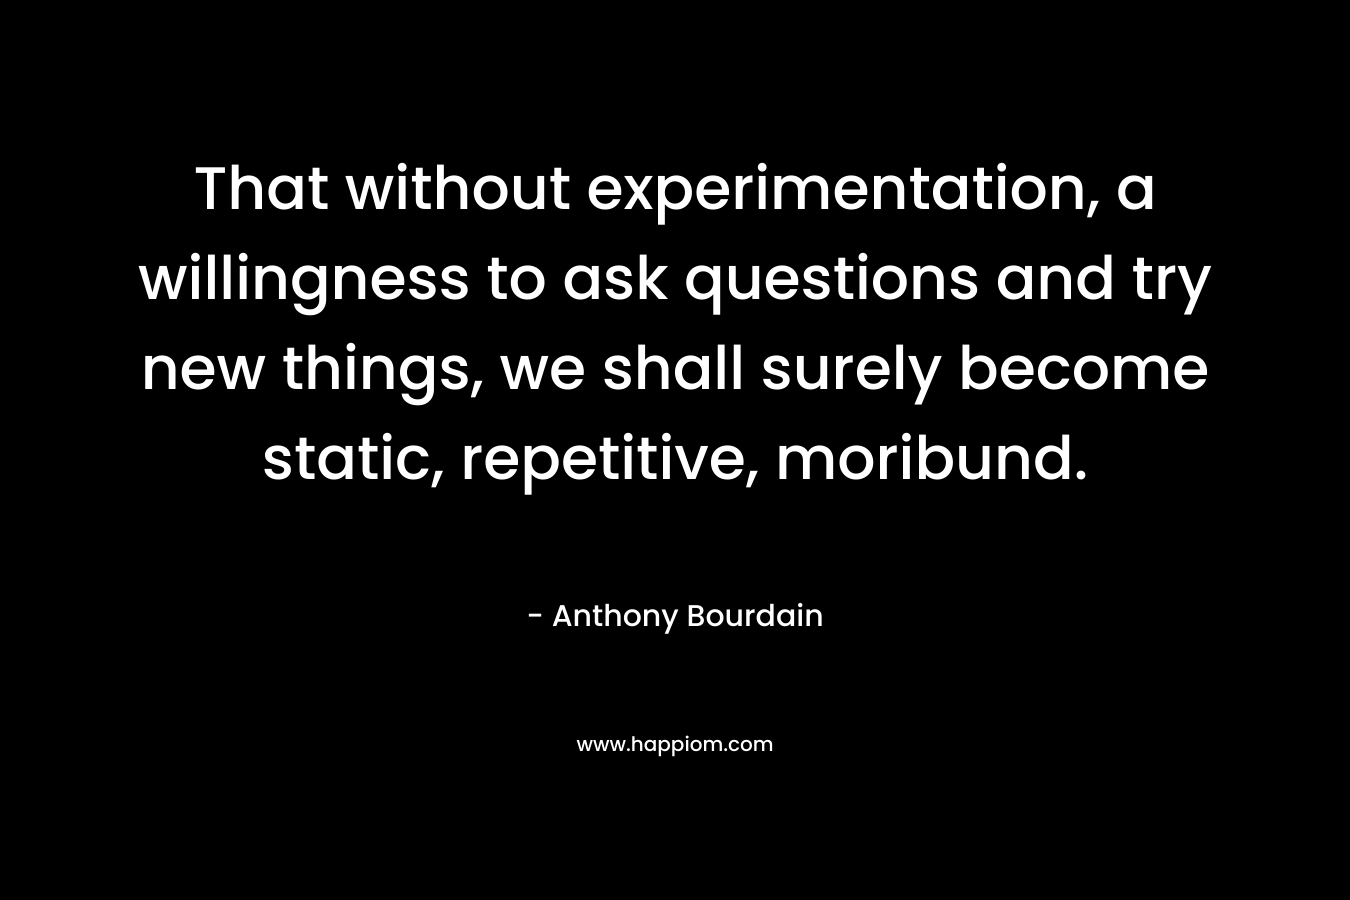 That without experimentation, a willingness to ask questions and try new things, we shall surely become static, repetitive, moribund. – Anthony Bourdain